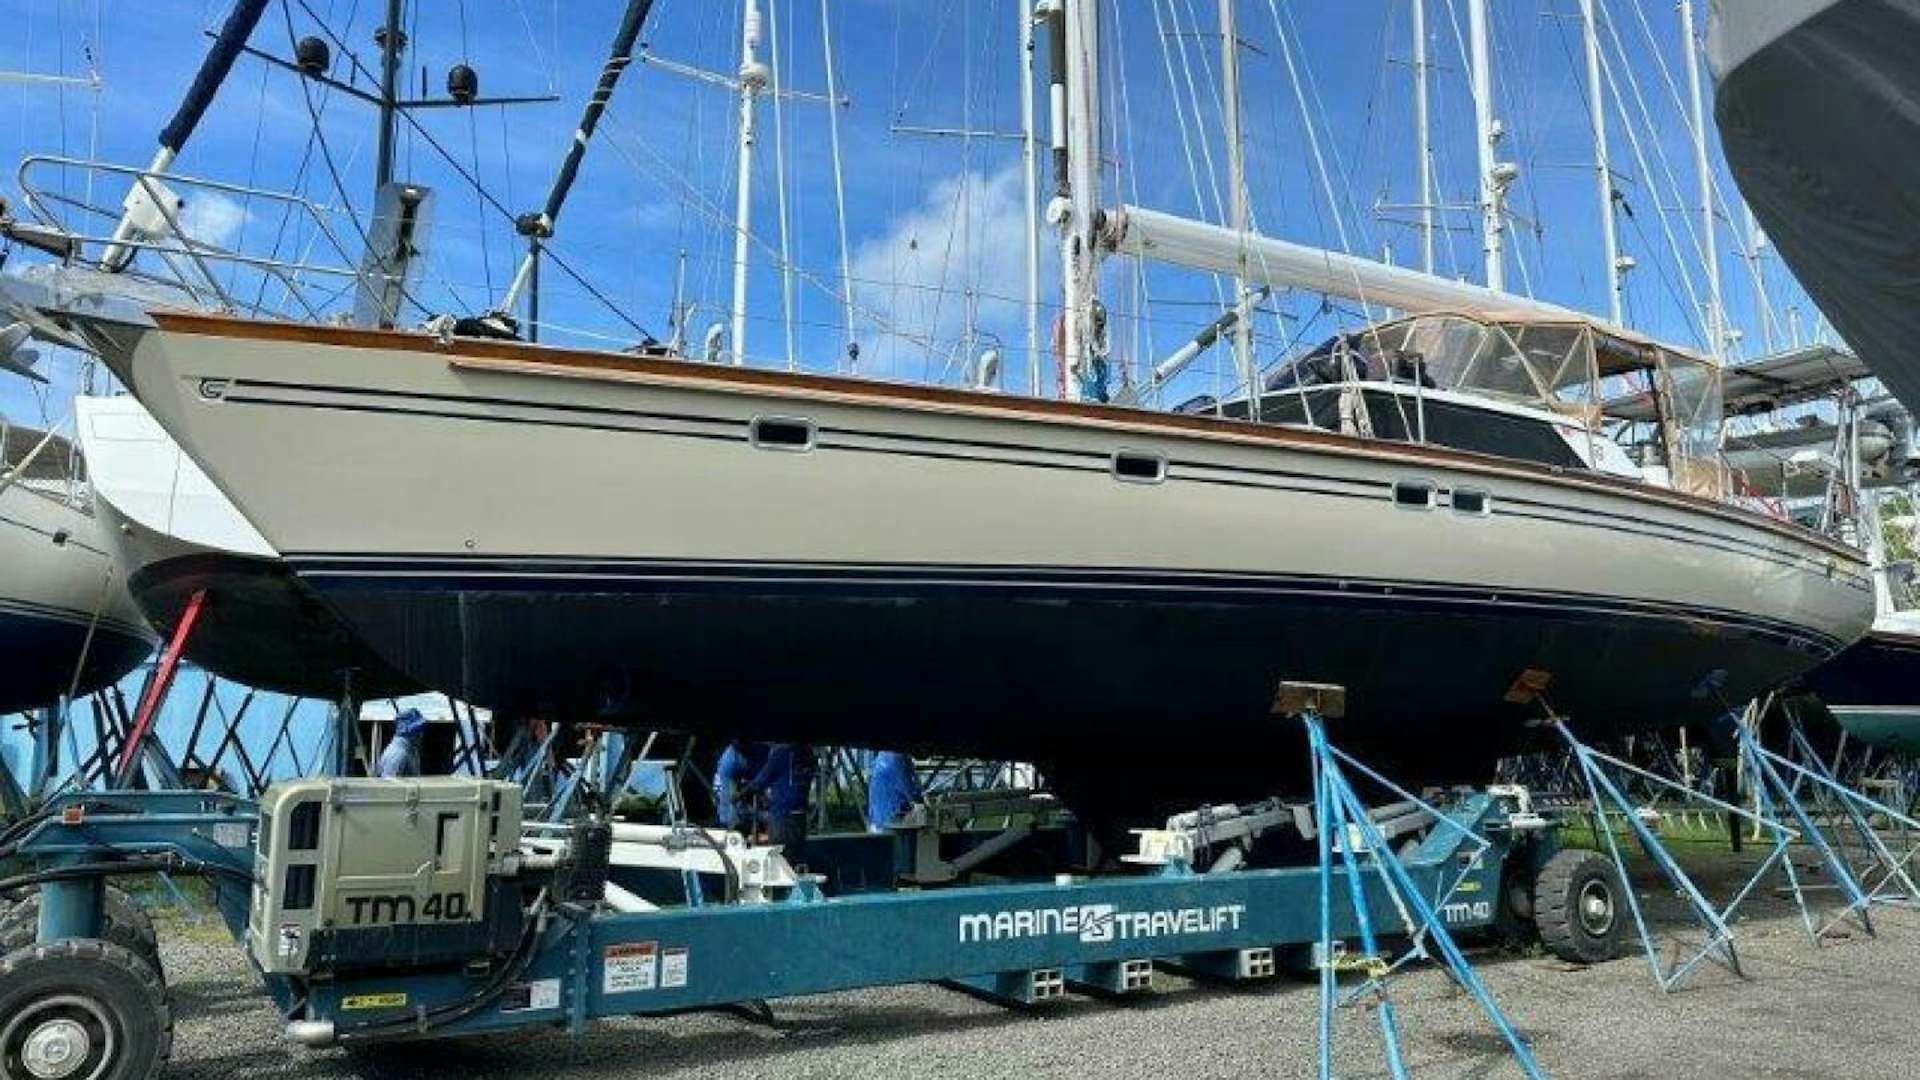 Celebrate
Yacht for Sale